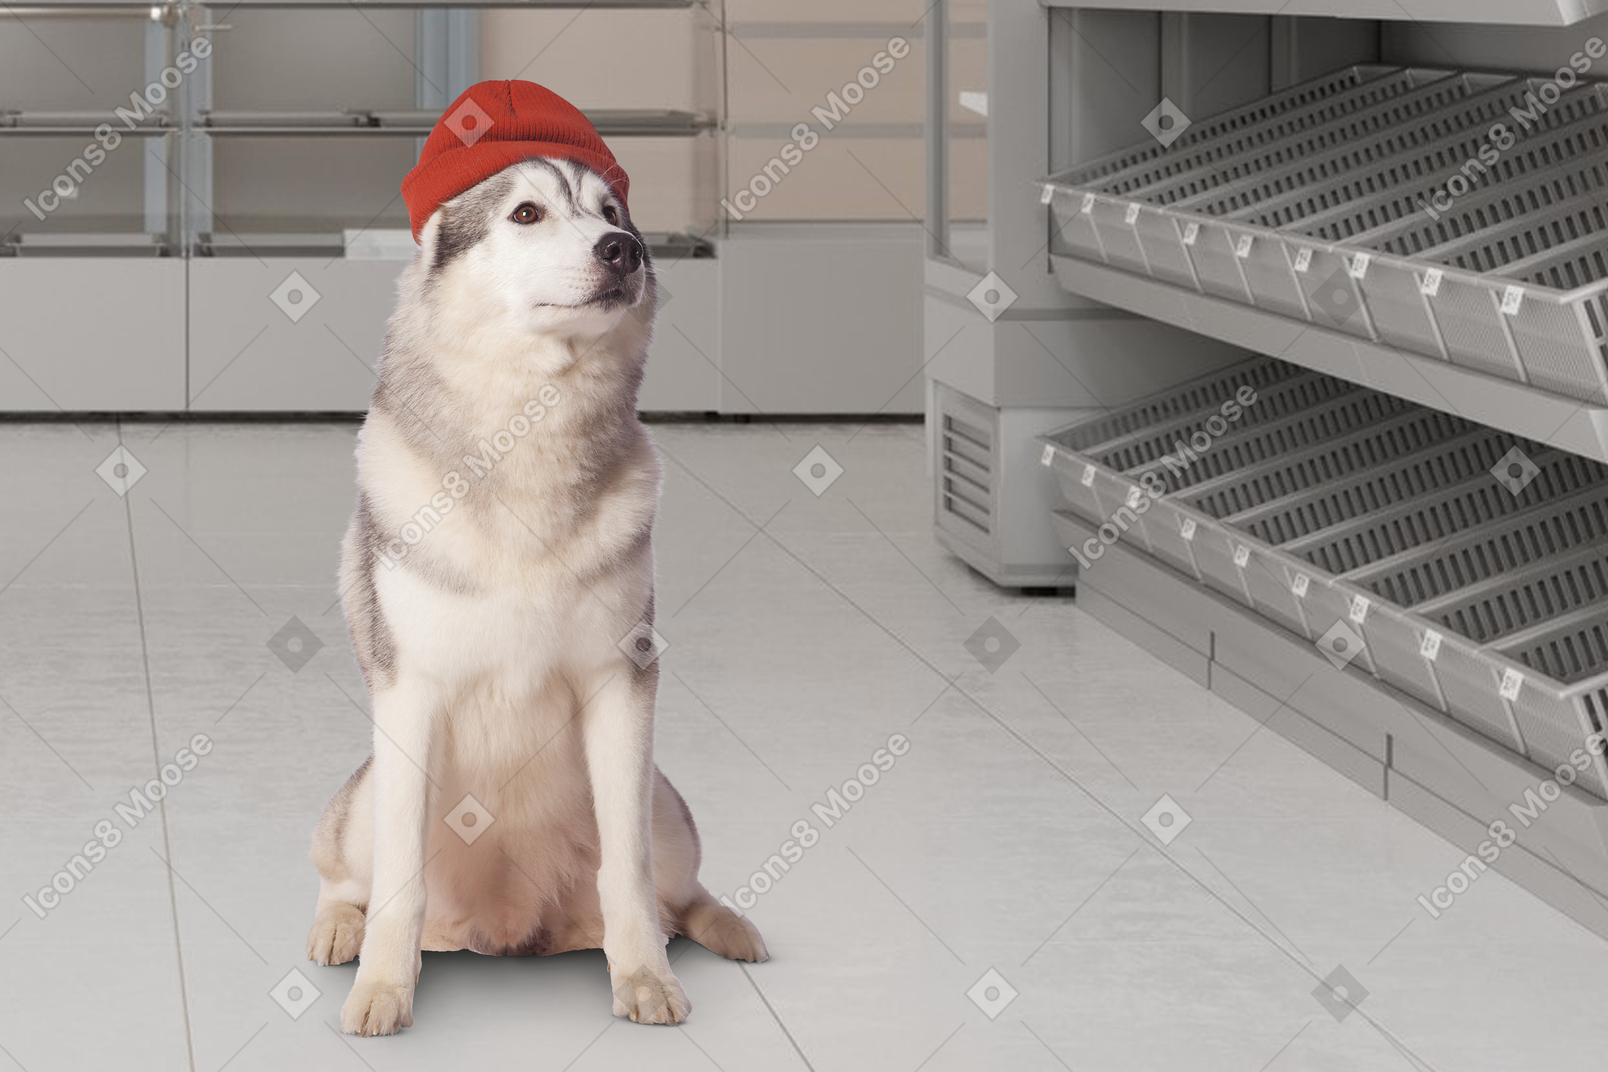 A husky dog wearing a red hat in a store